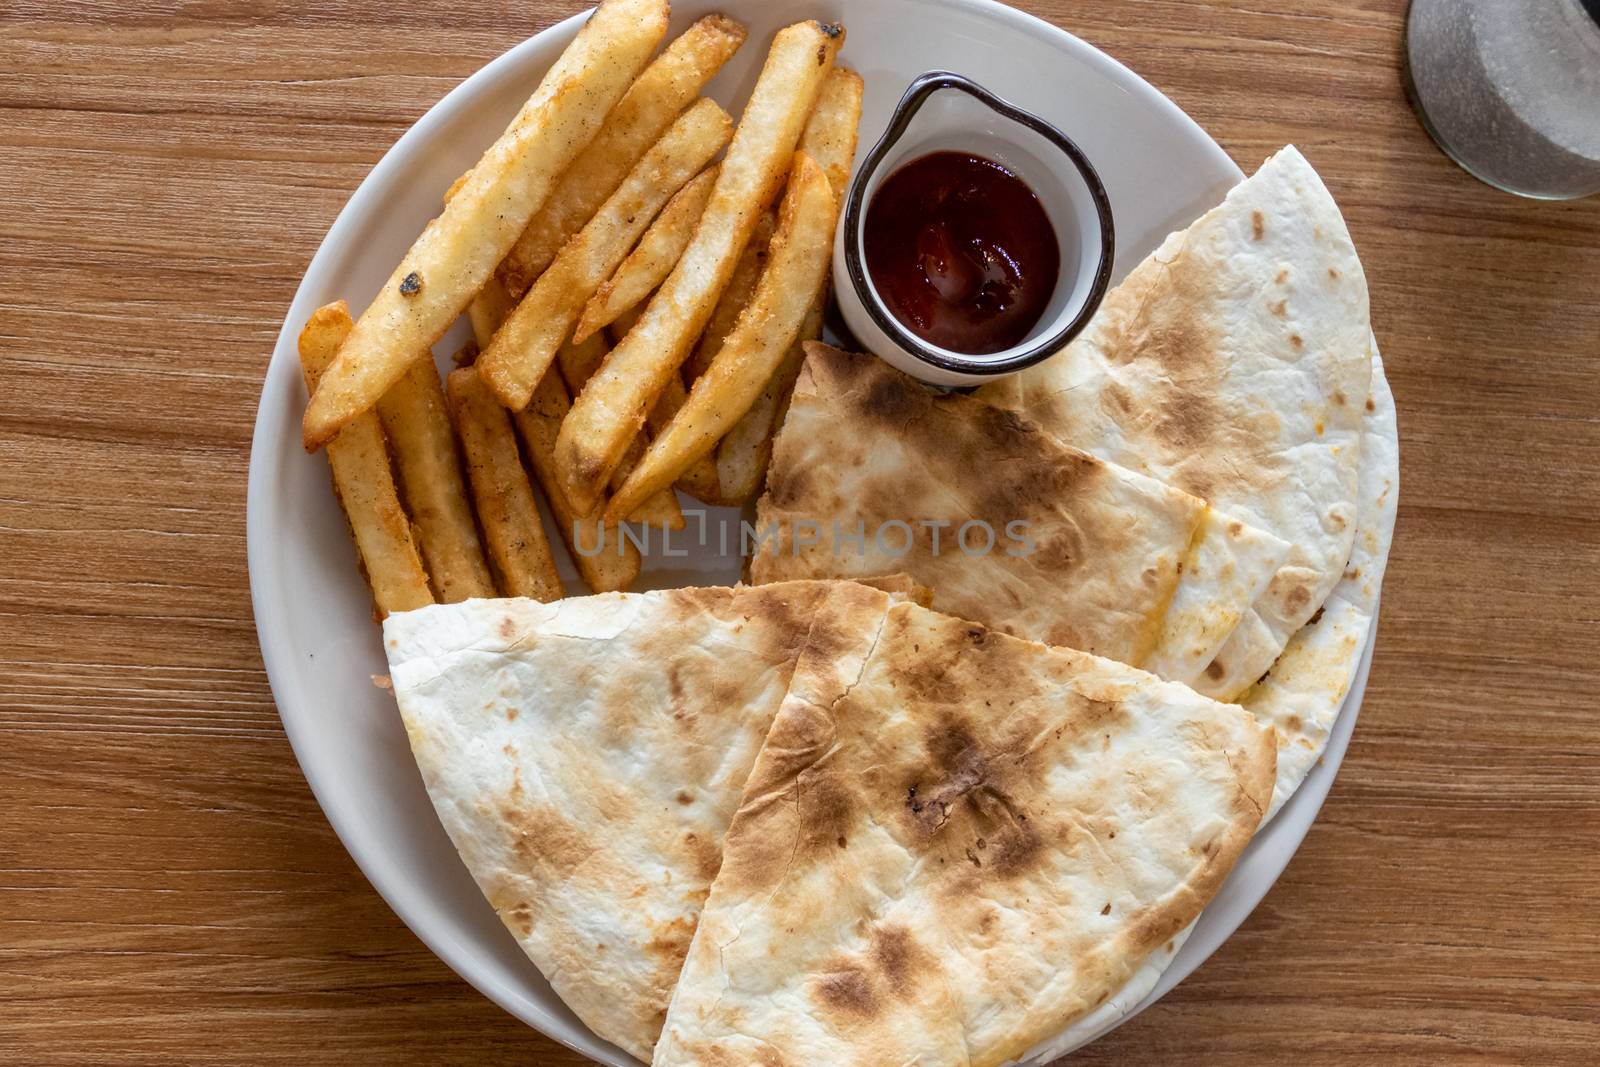 Quesadilla and french fries on plate, shot from above